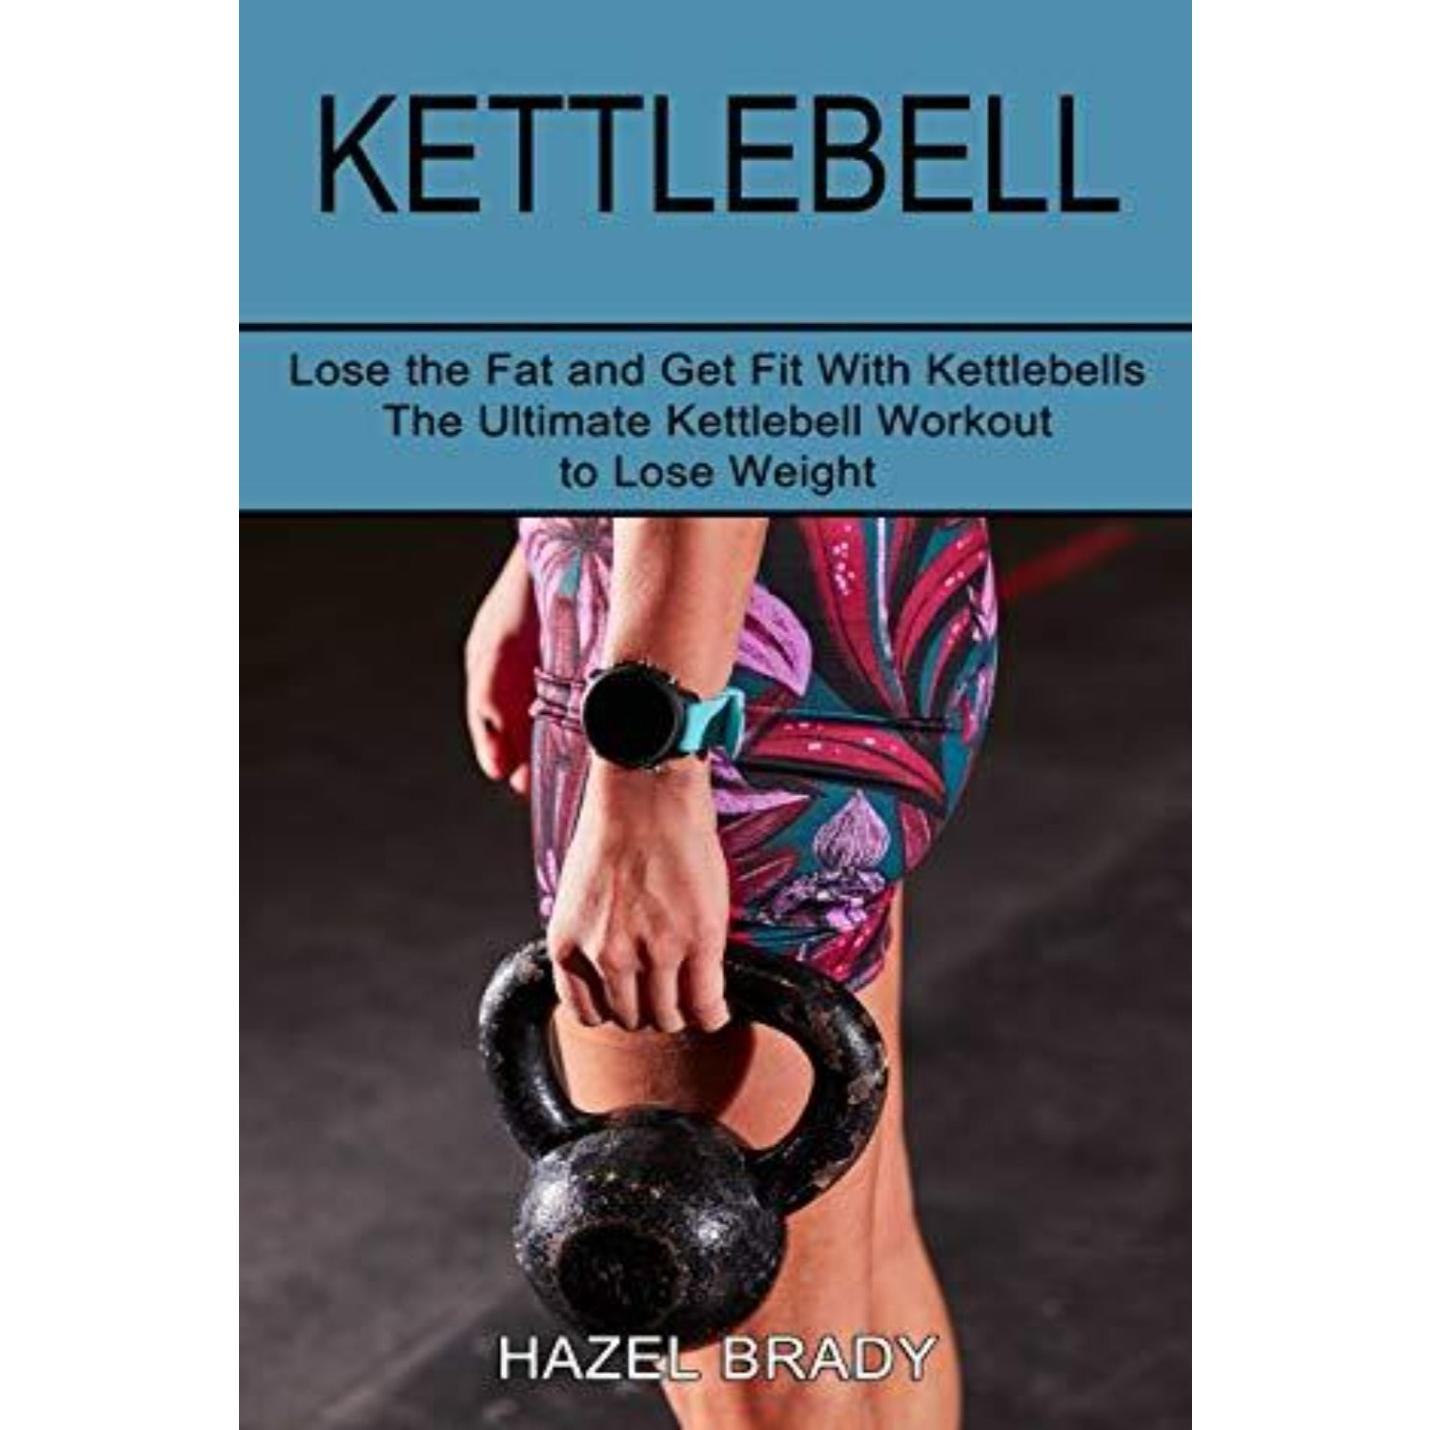 Kettlebell: The Ultimate Kettlebell Workout to Lose Weight (Lose the Fat and Get Fit With Kettlebells) - happygetfit.com